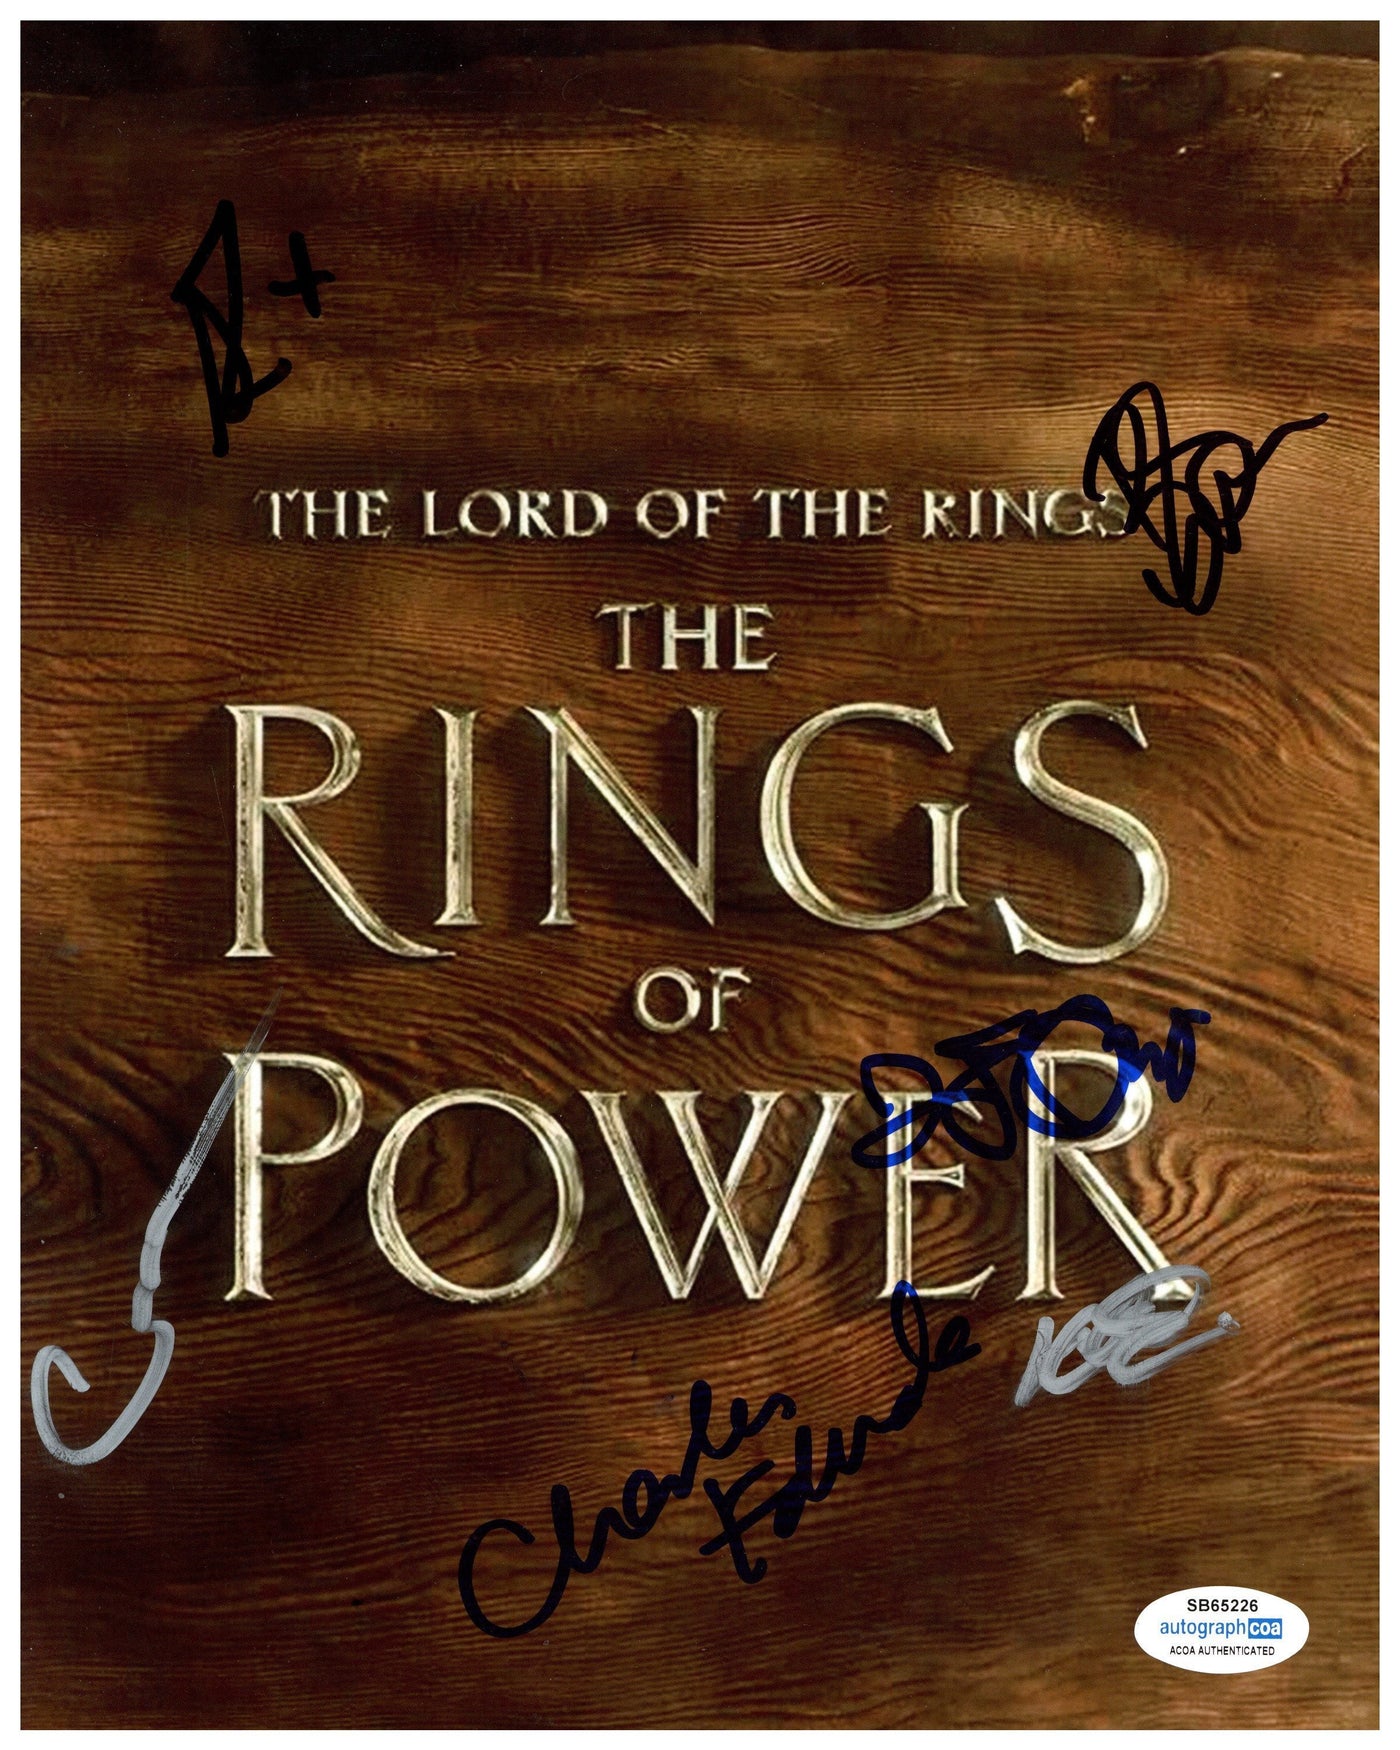 Lord of the Rings: Rings of Power Cast Signed 8x10 Photo Autographed ACOA 226